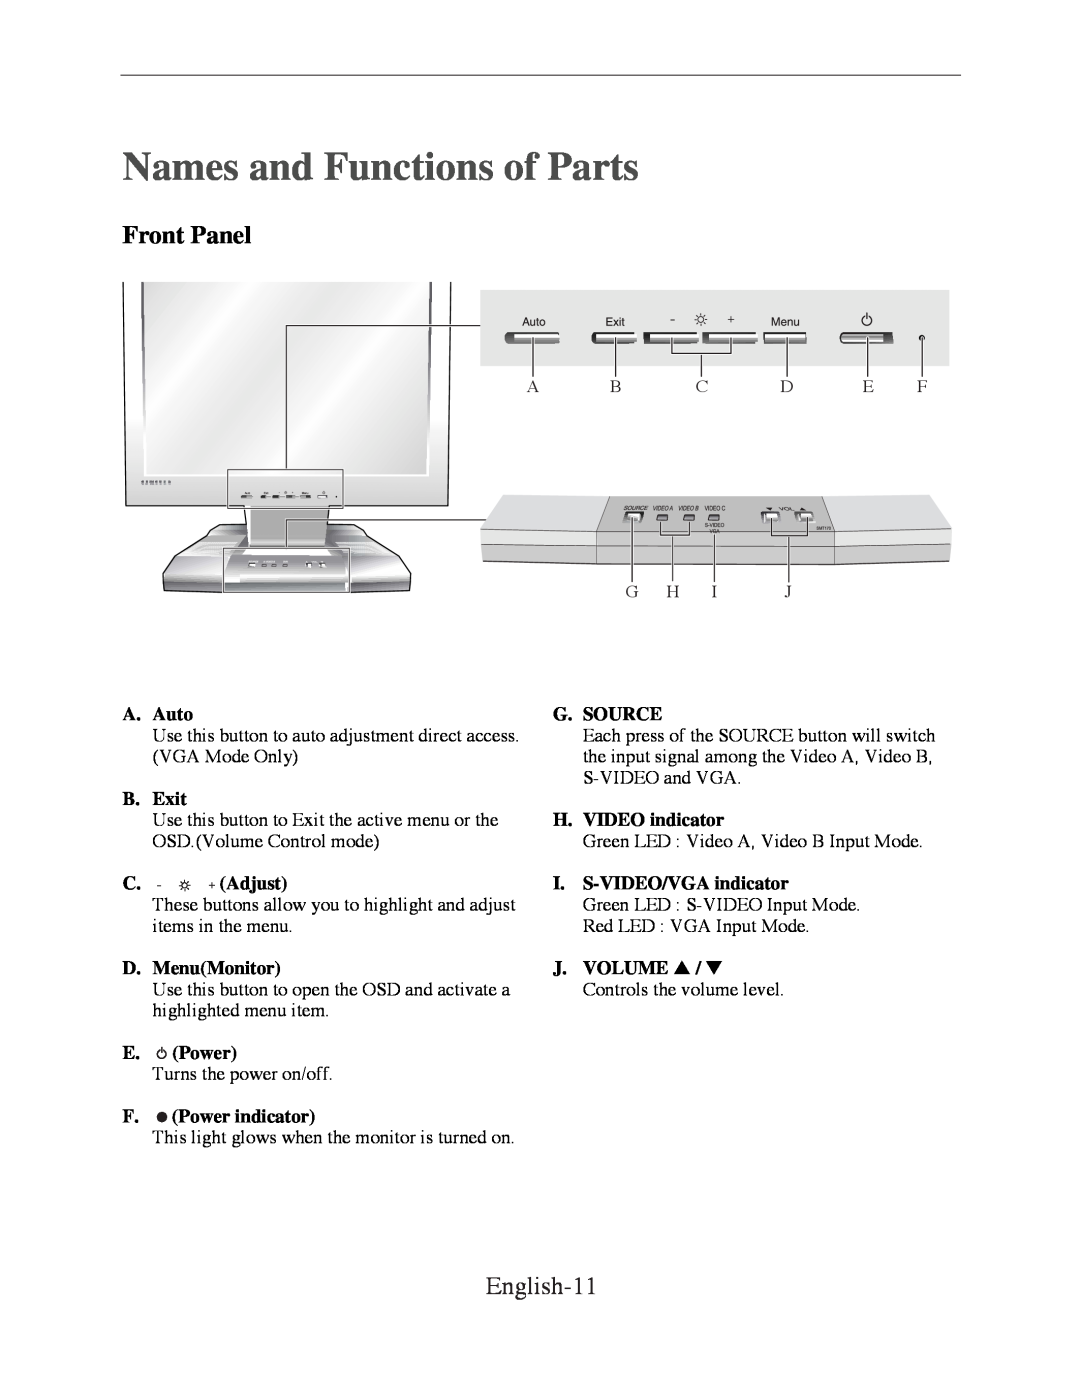 Samsung SMT-170P manual Names and Functions of Parts, Front Panel, English-11 